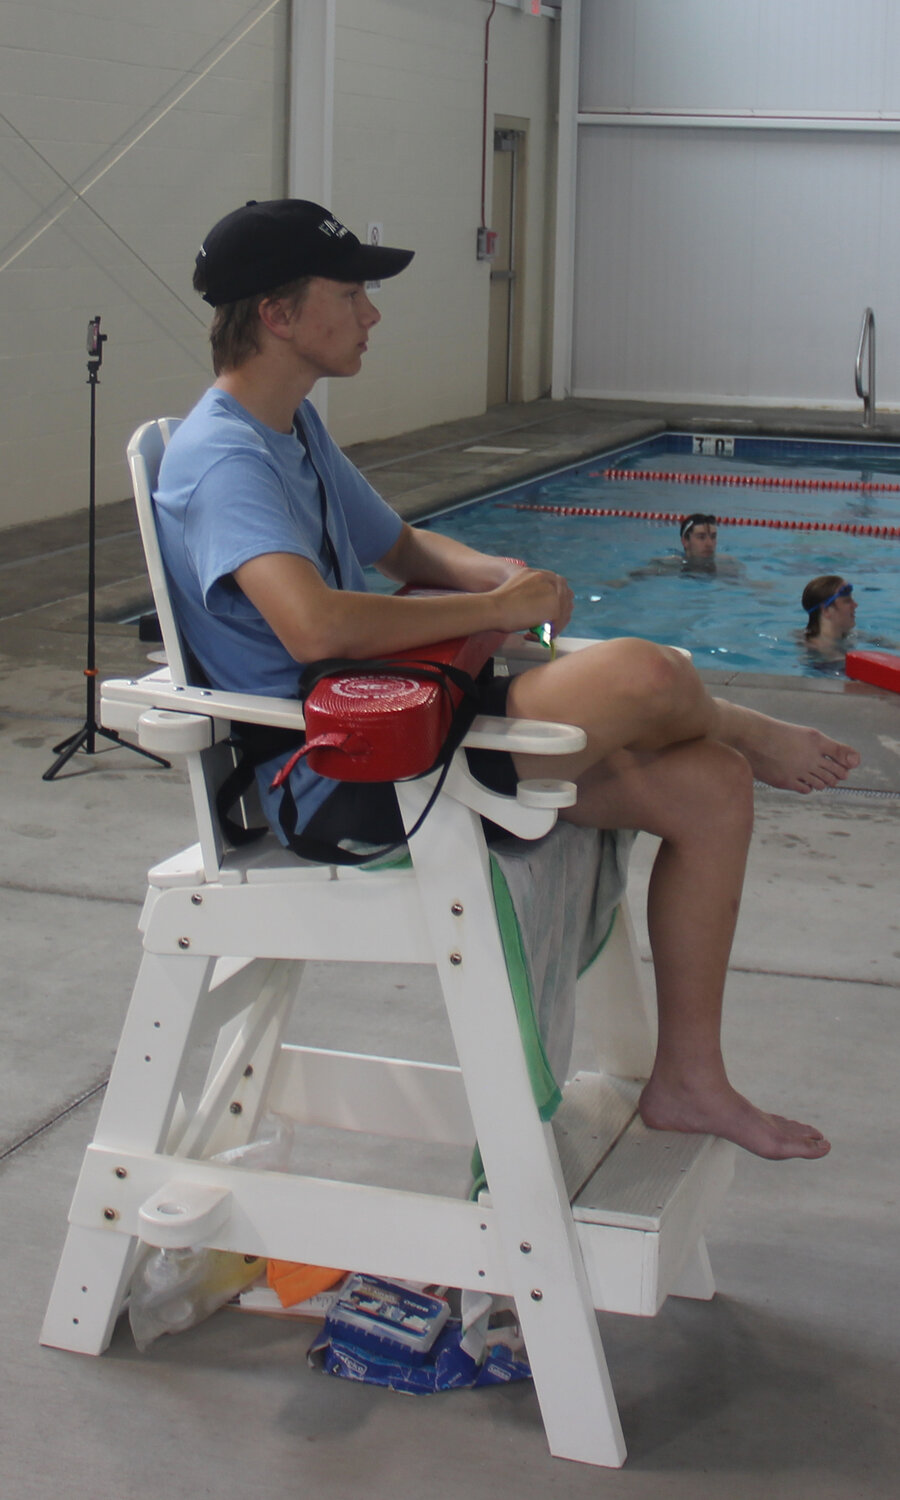 Lifeguard Nathanial Kutsch watches over the pool at the Warrenton Aquatic Center..